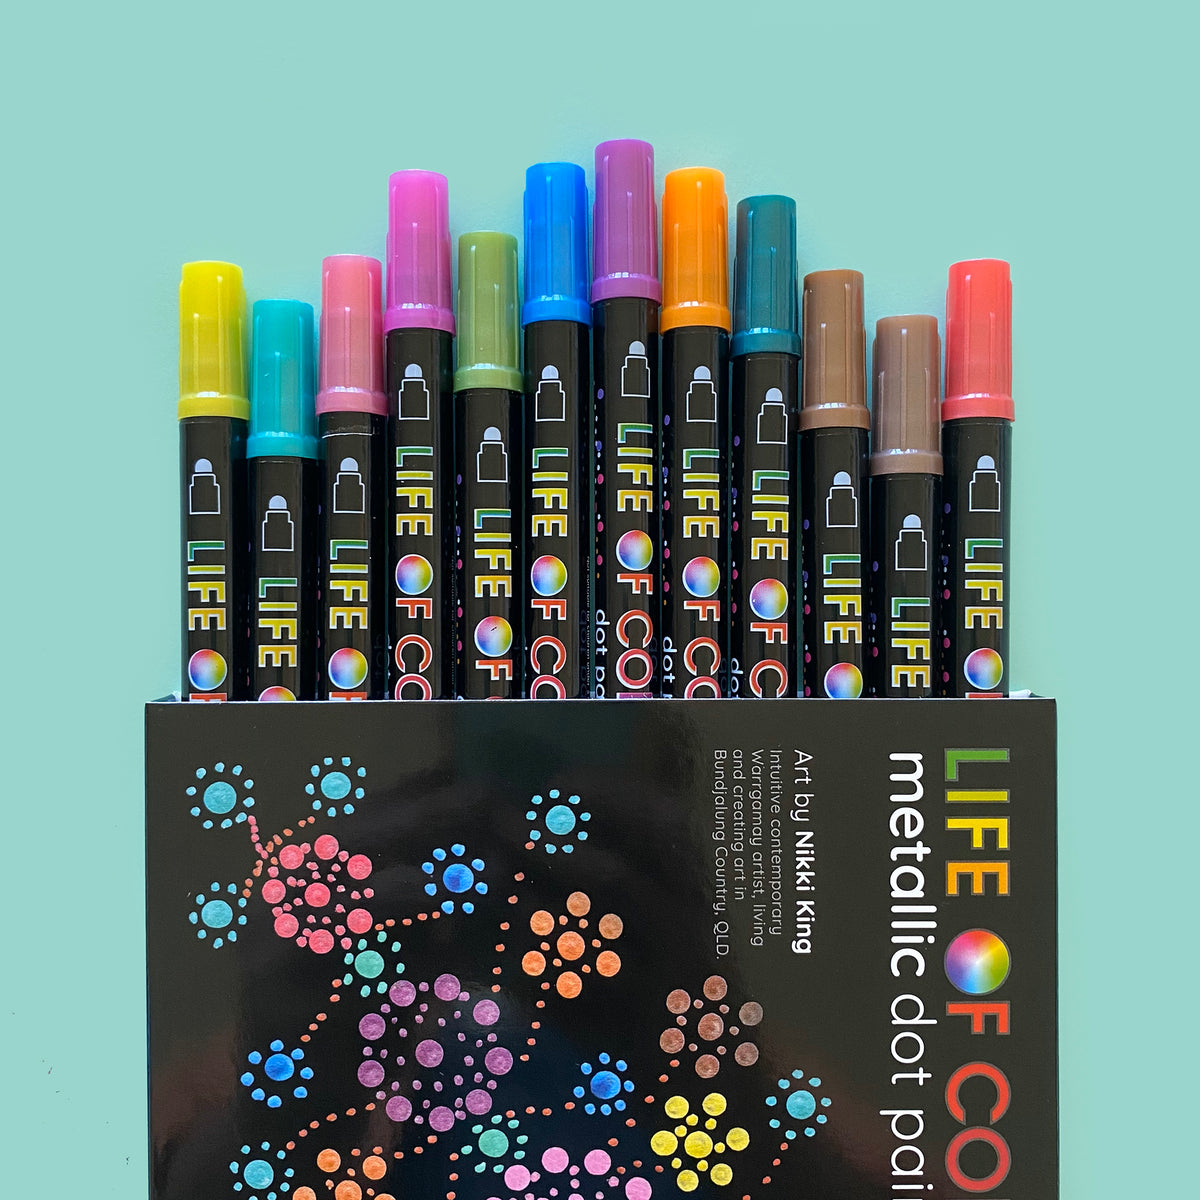 3 Life of Colour Acrylic Paint Pens - Chrome Mirror Effect - 30% OFF - Mini  Mad Things